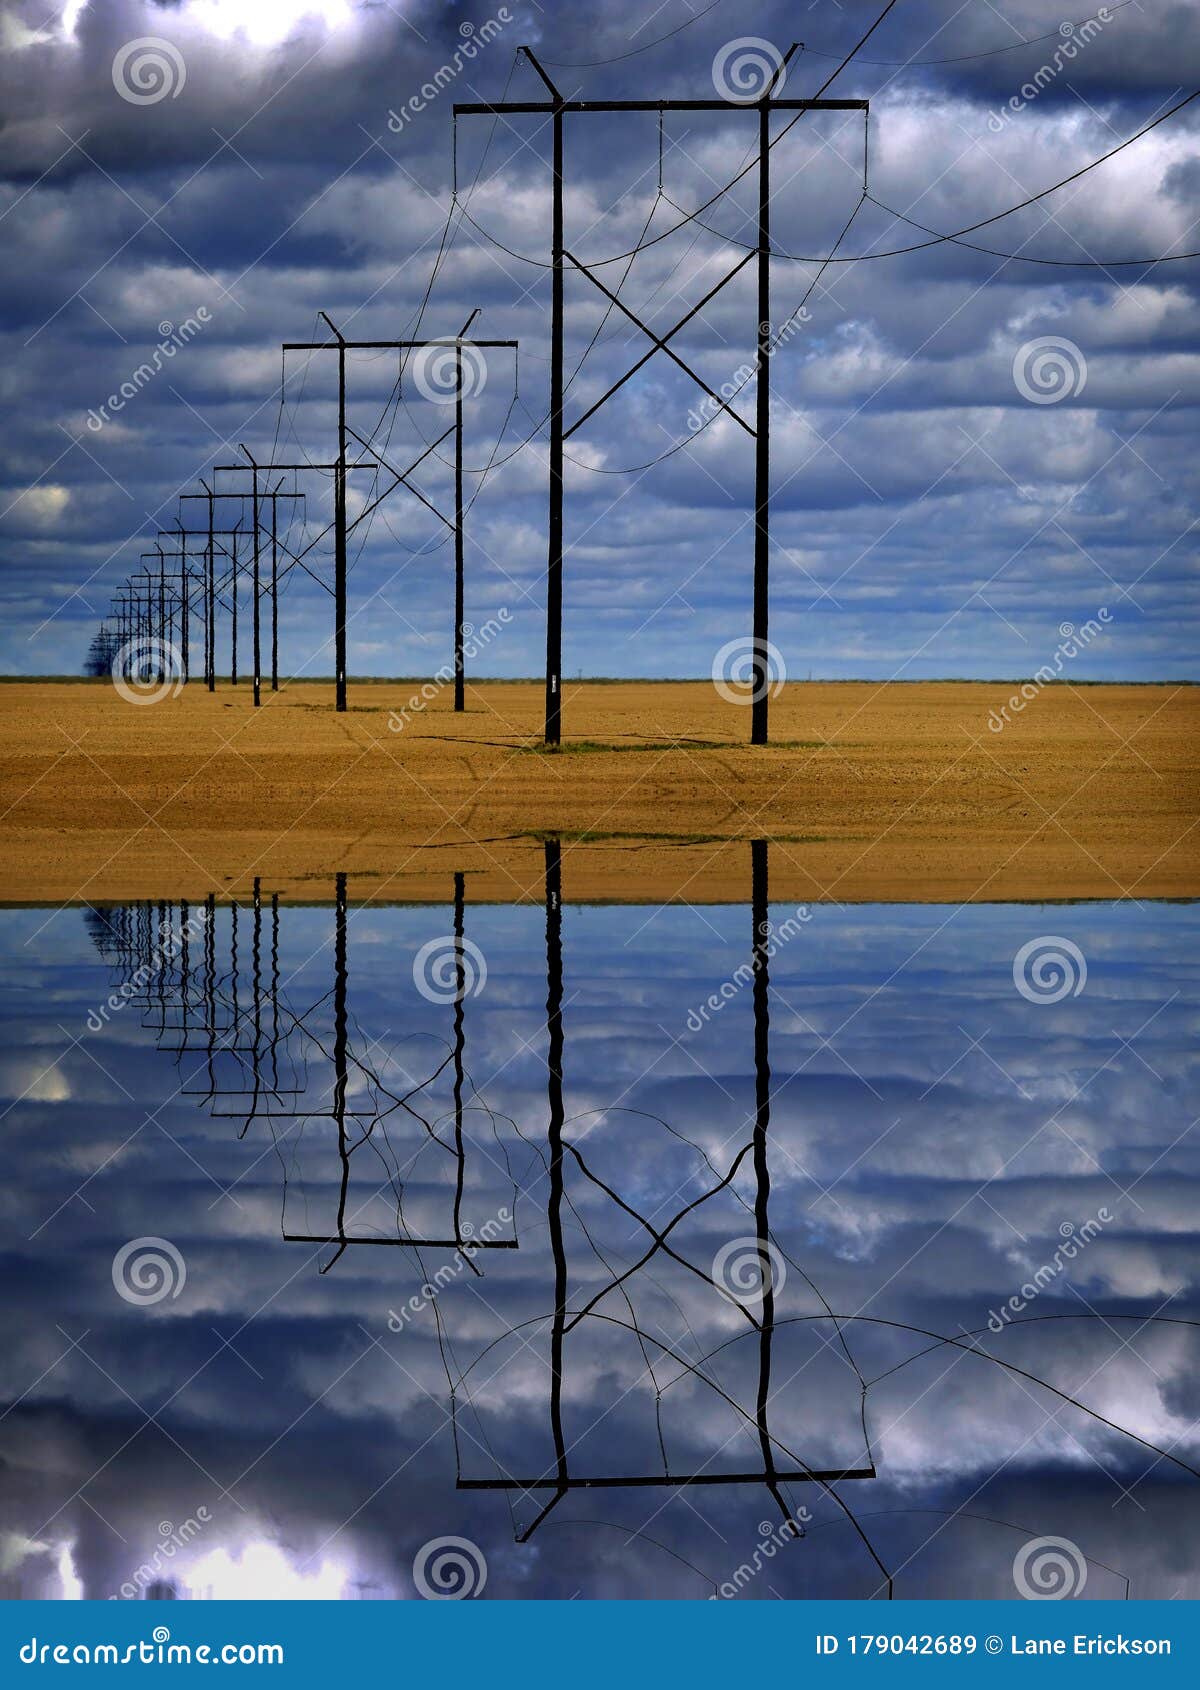 powerlines in field with blue sky and clouds reflection in water